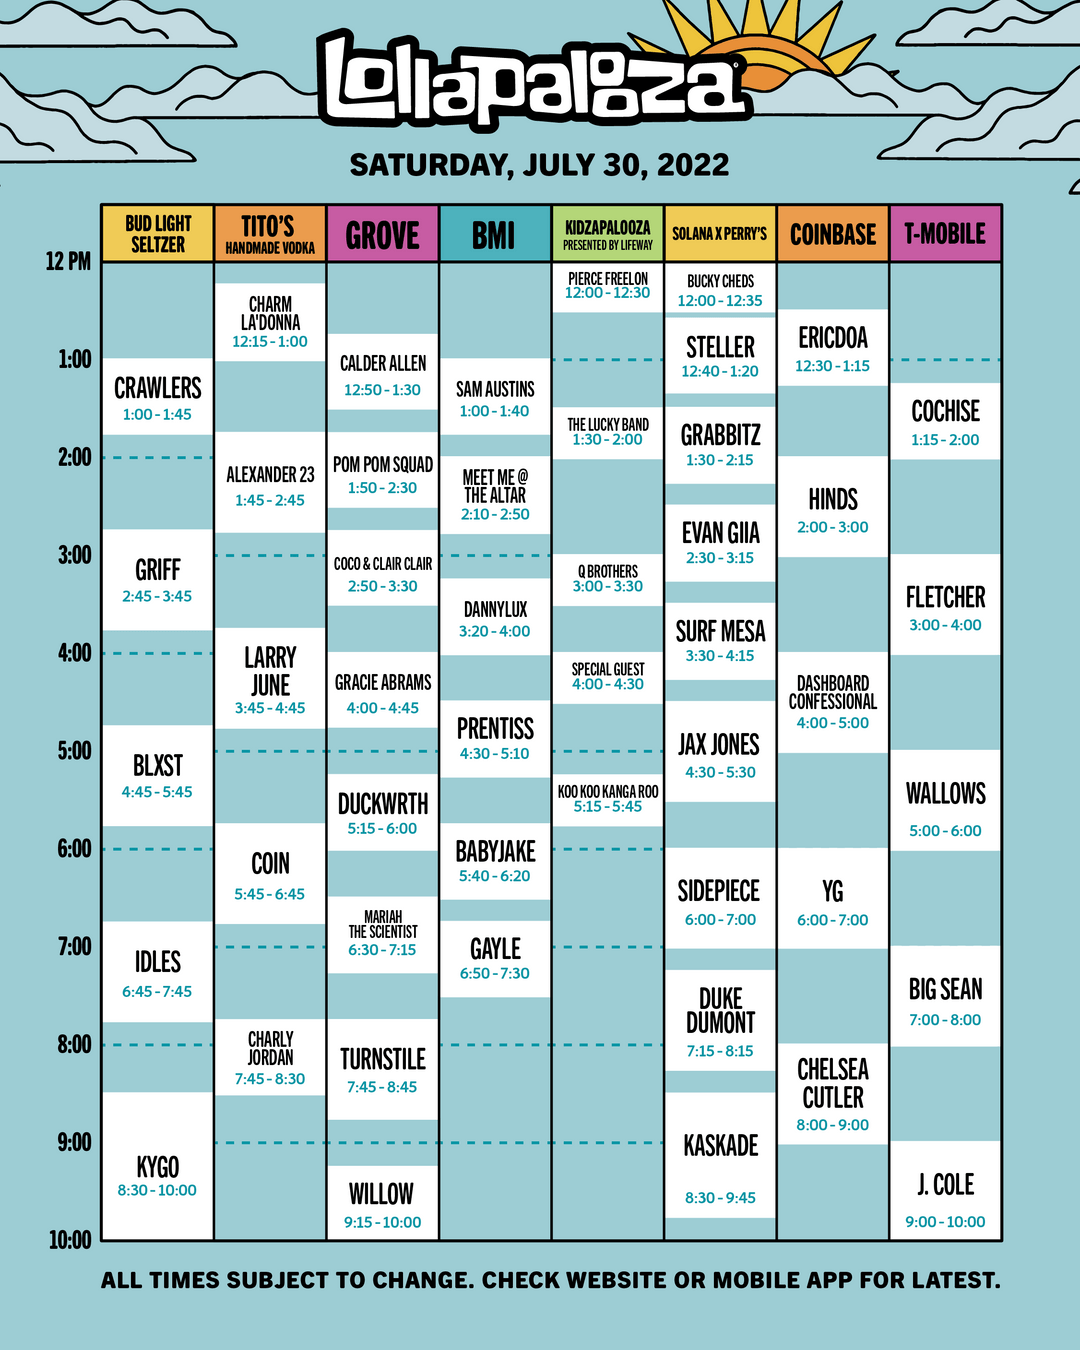 2022 Lollapalooza Schedule Announced 3